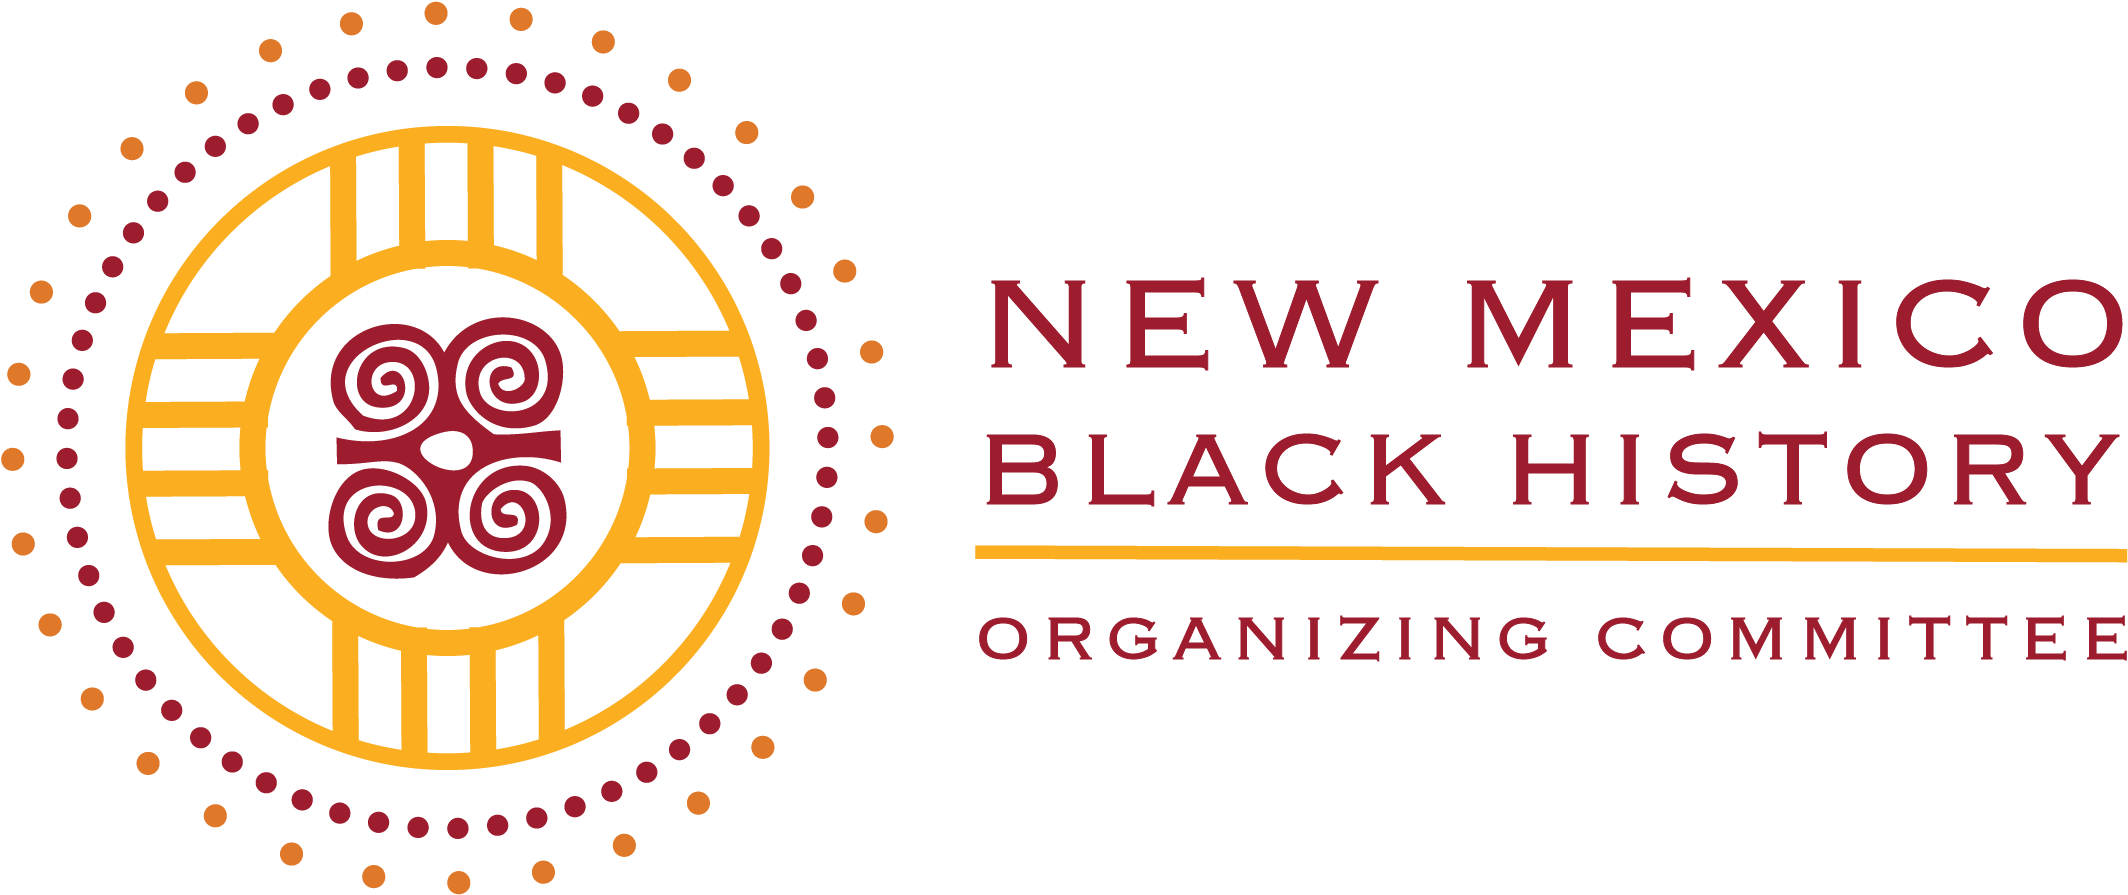 New Mexico Black History Organizing Committee Circle